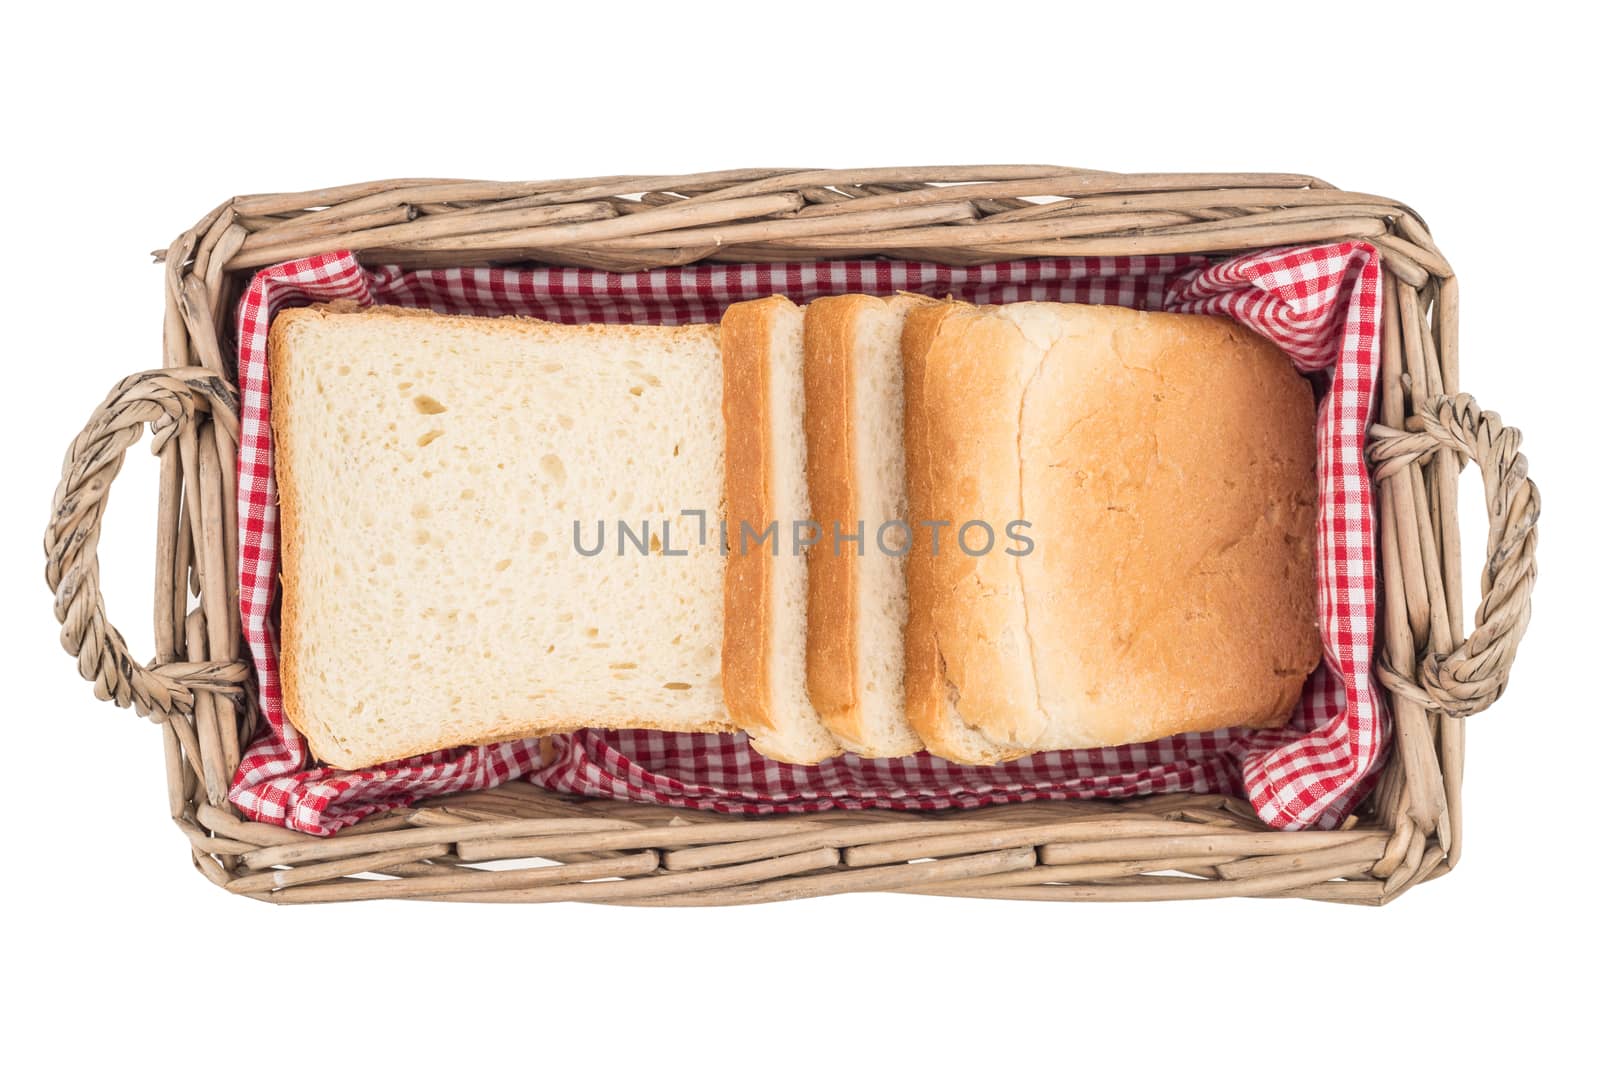 White bread in basket. Slice. Isolated on white background by DGolbay